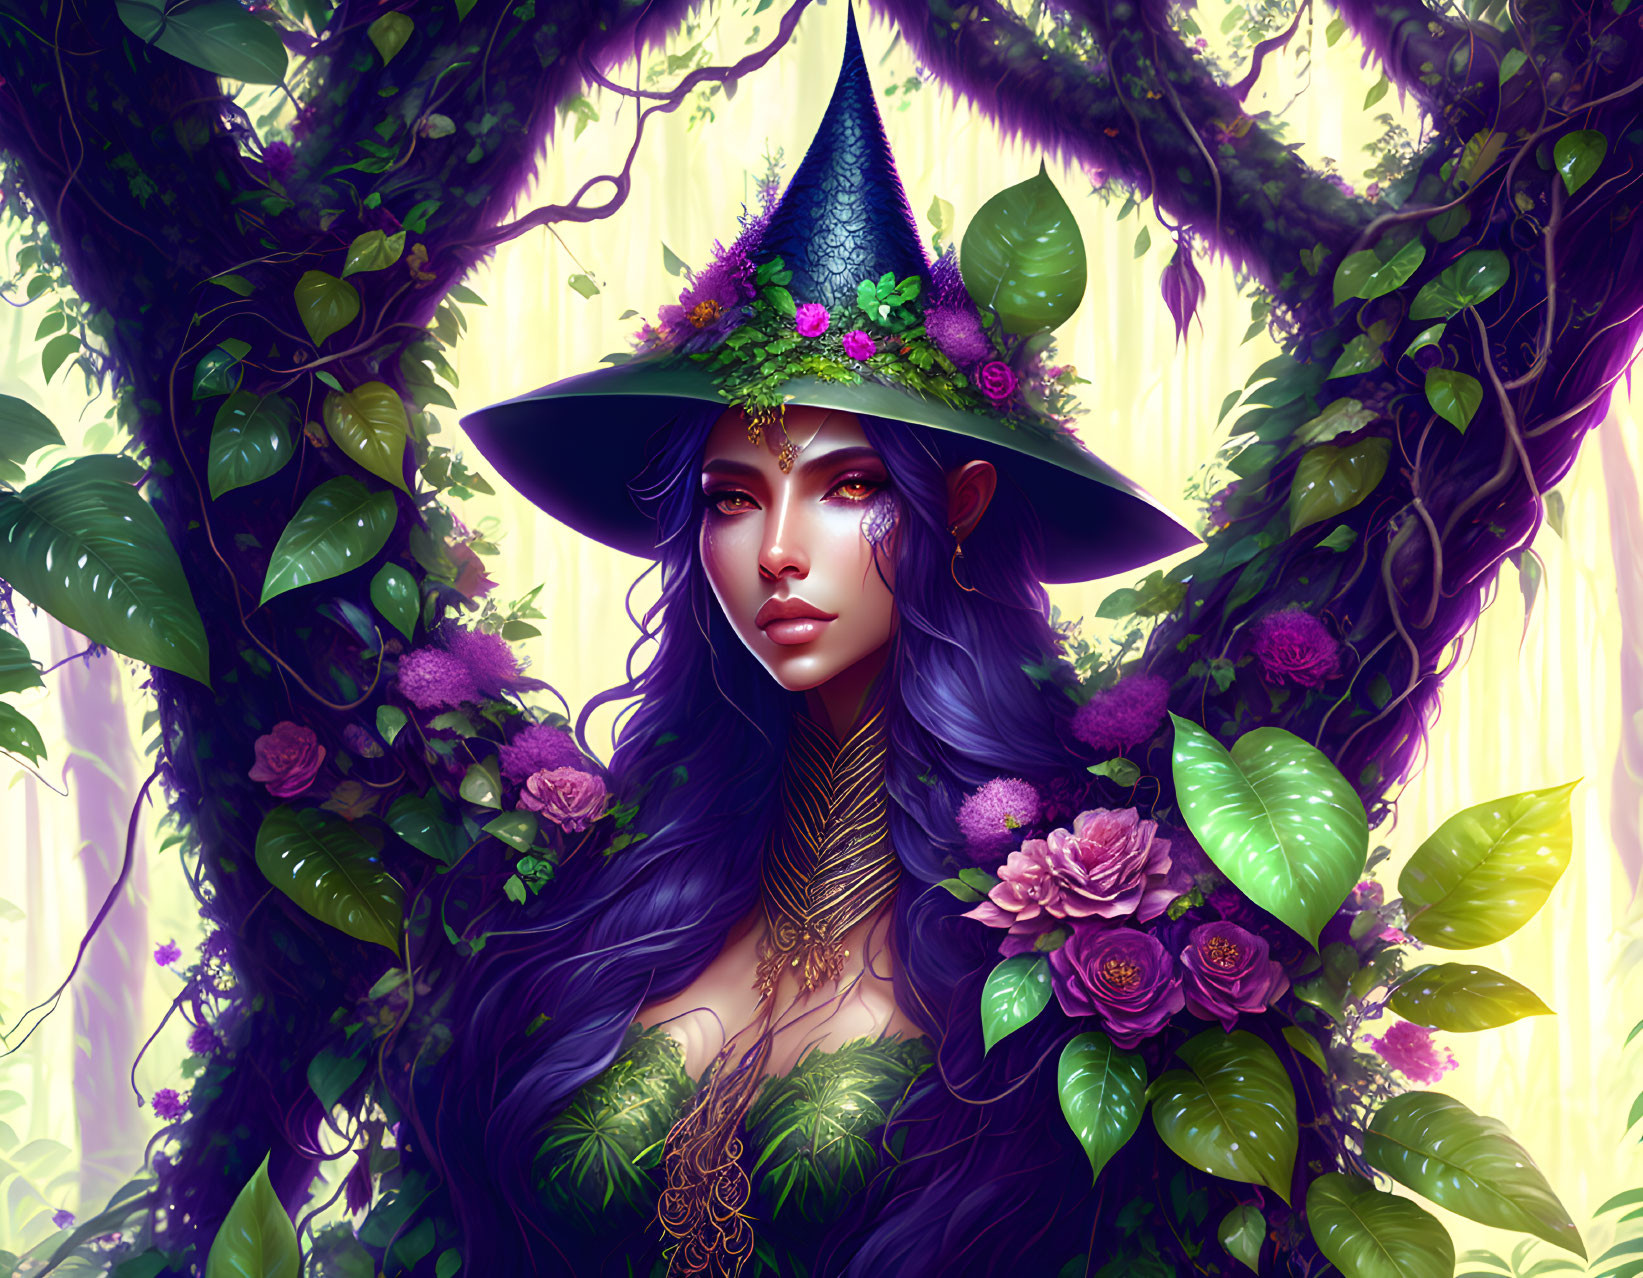 Violet-haired witch in floral hat surrounded by greenery and purple flowers